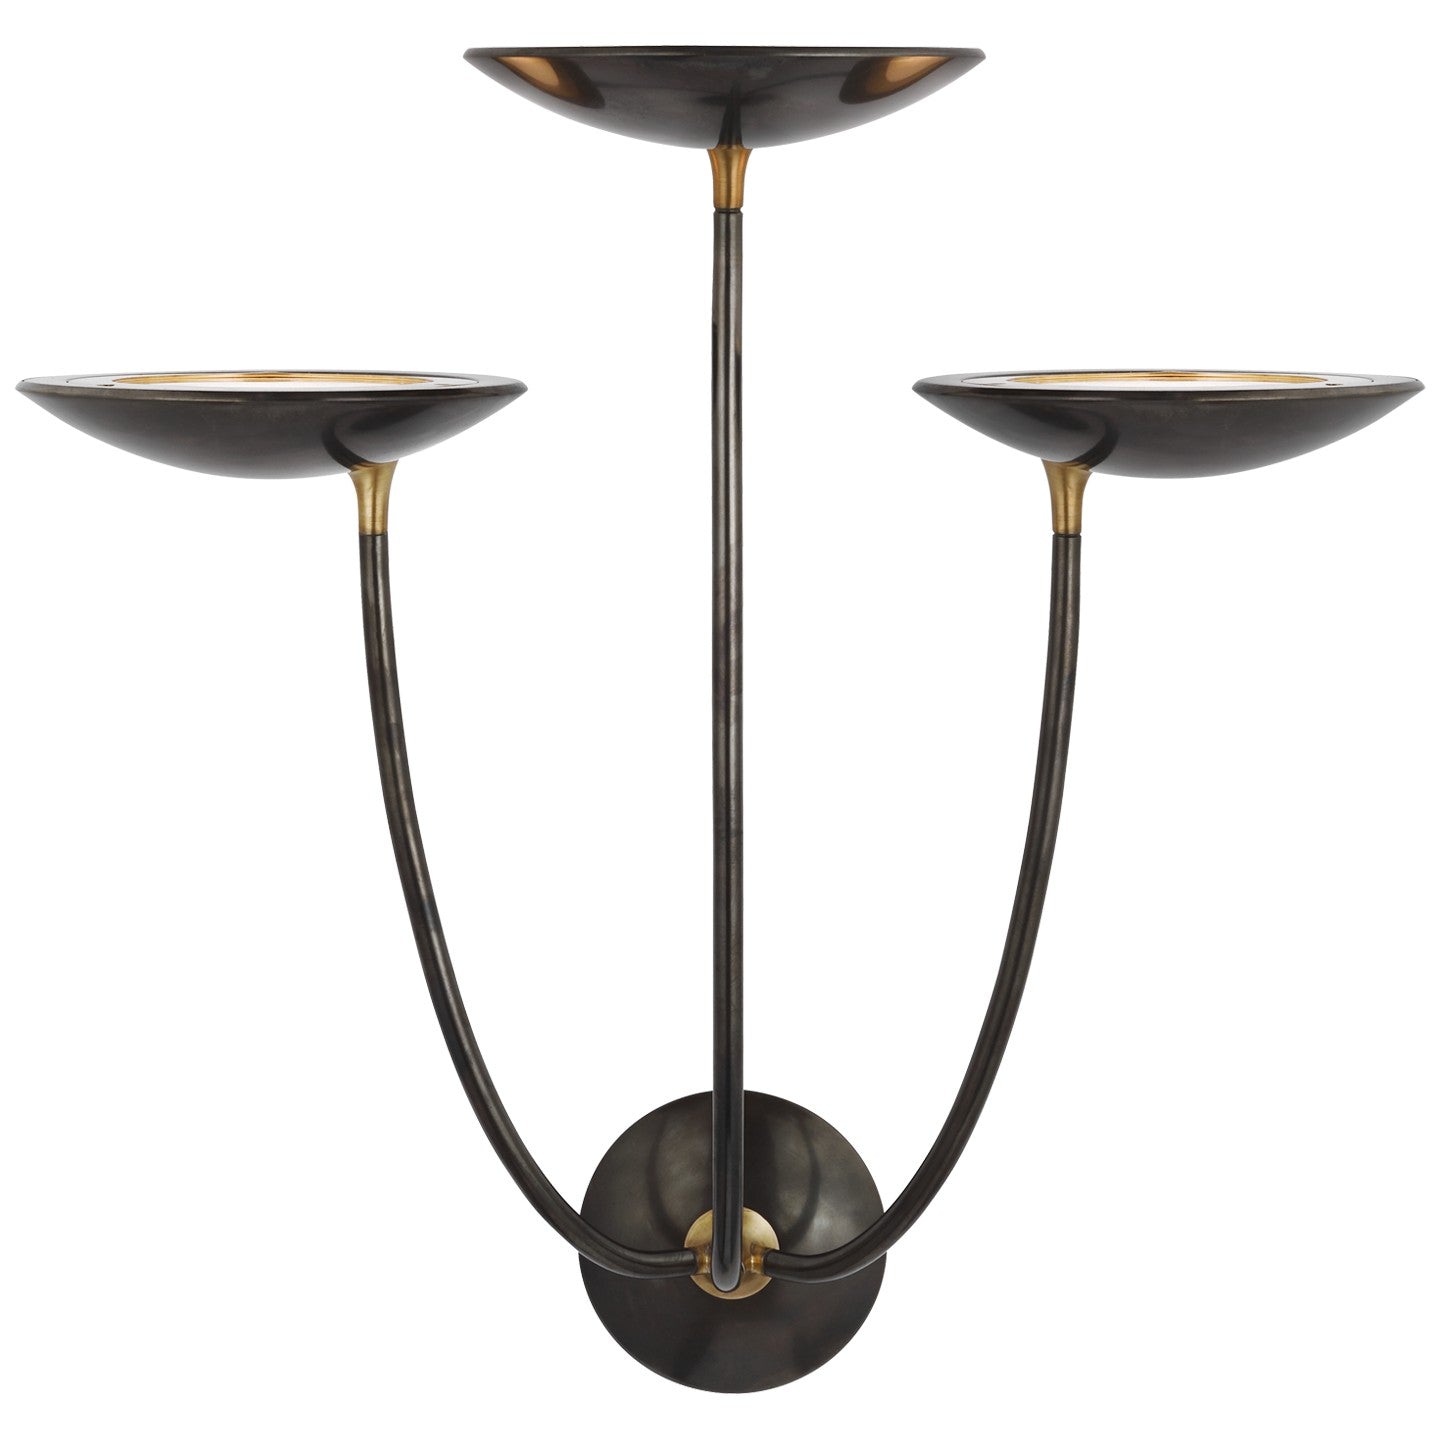 Visual Comfort Signature - TOB 2785BZ/HAB - LED Wall Sconce - Keira - Bronze and Hand-Rubbed Antique Brass